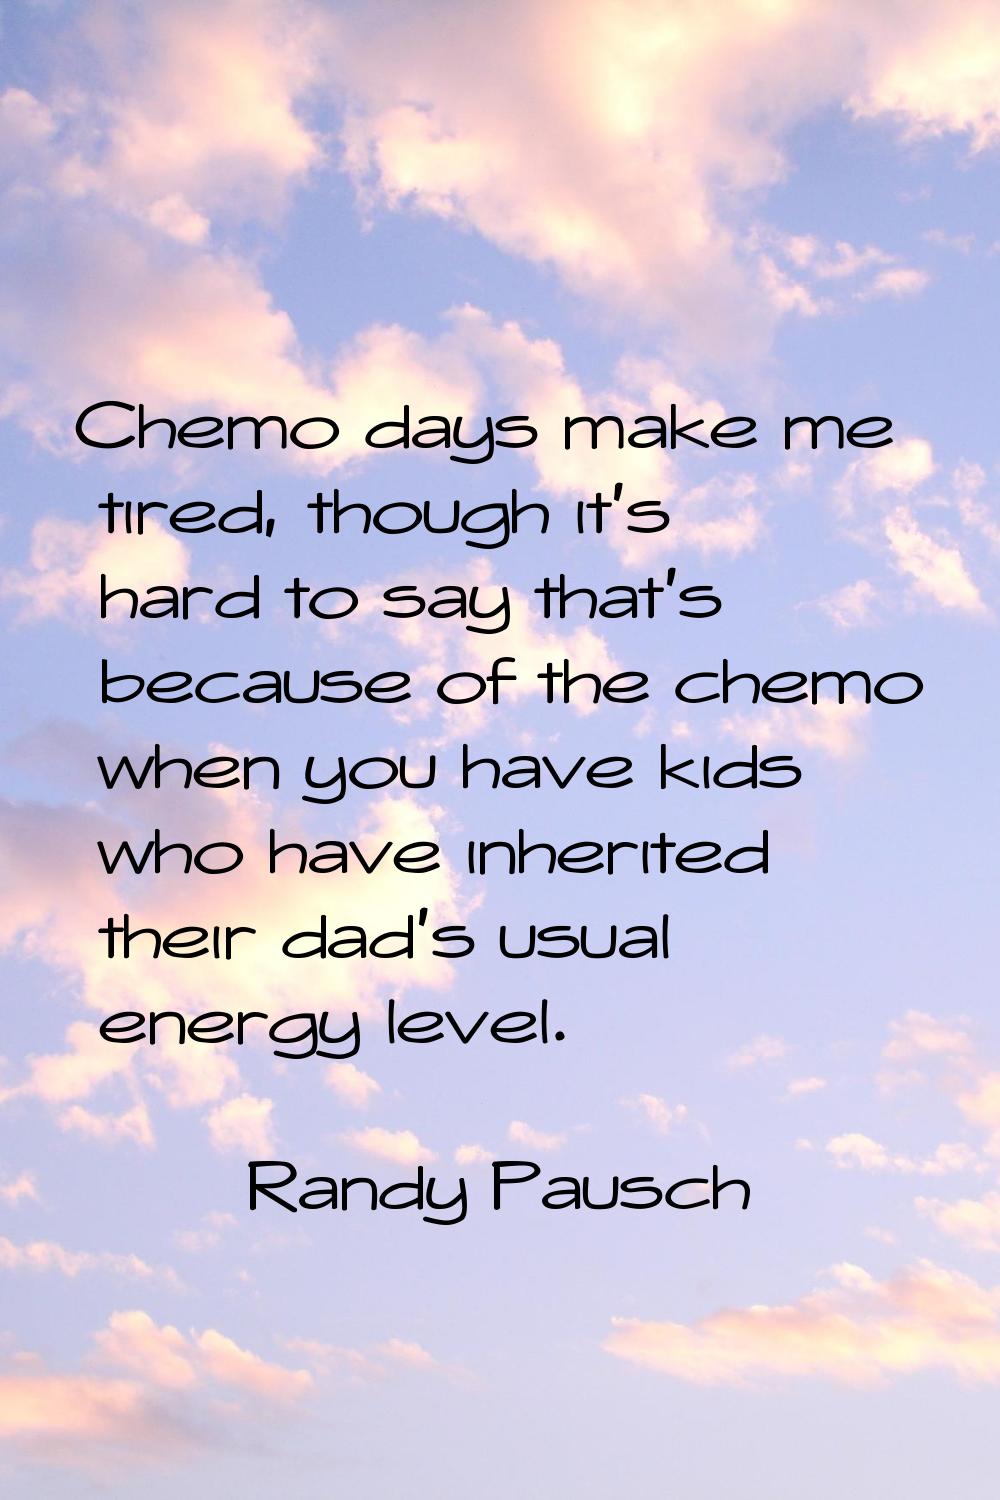 Chemo days make me tired, though it's hard to say that's because of the chemo when you have kids wh